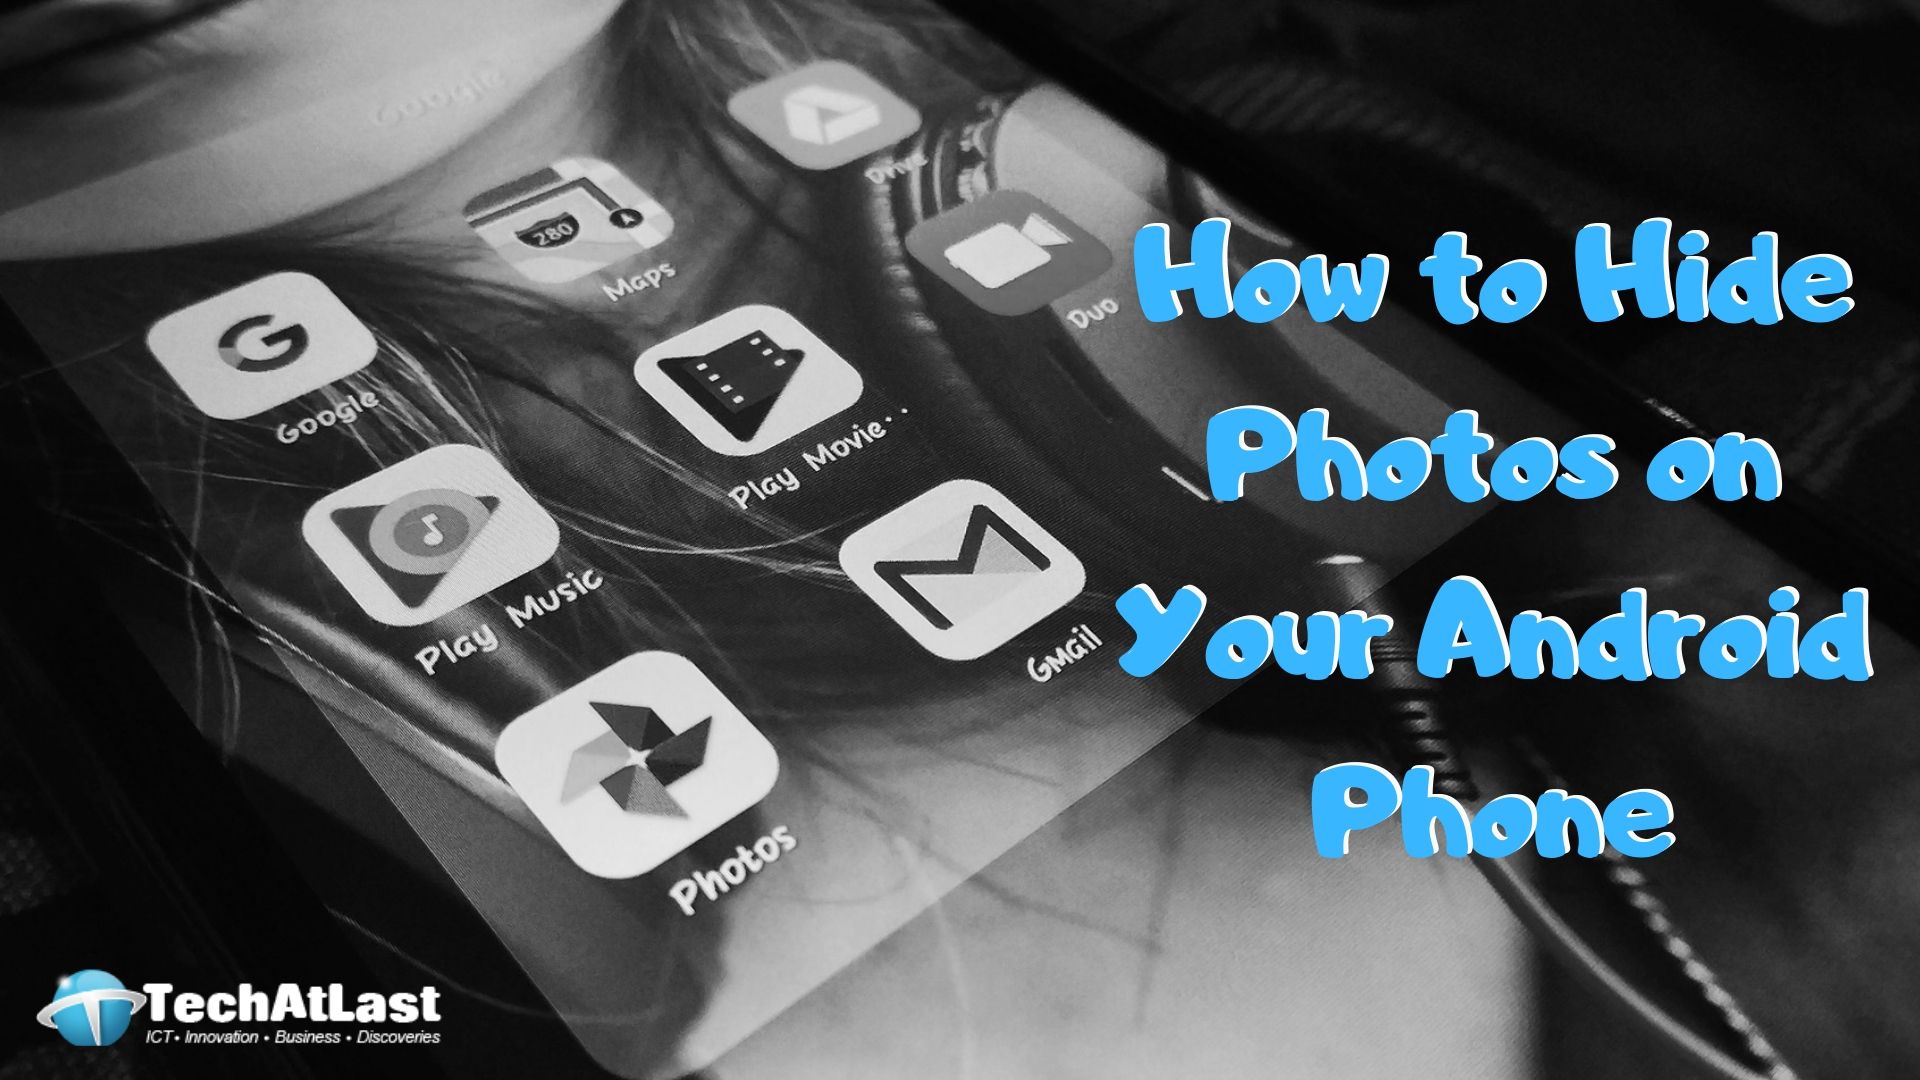 Hide Images on Android - How to Hide Photos on Your Android Phone - TECHATLAST